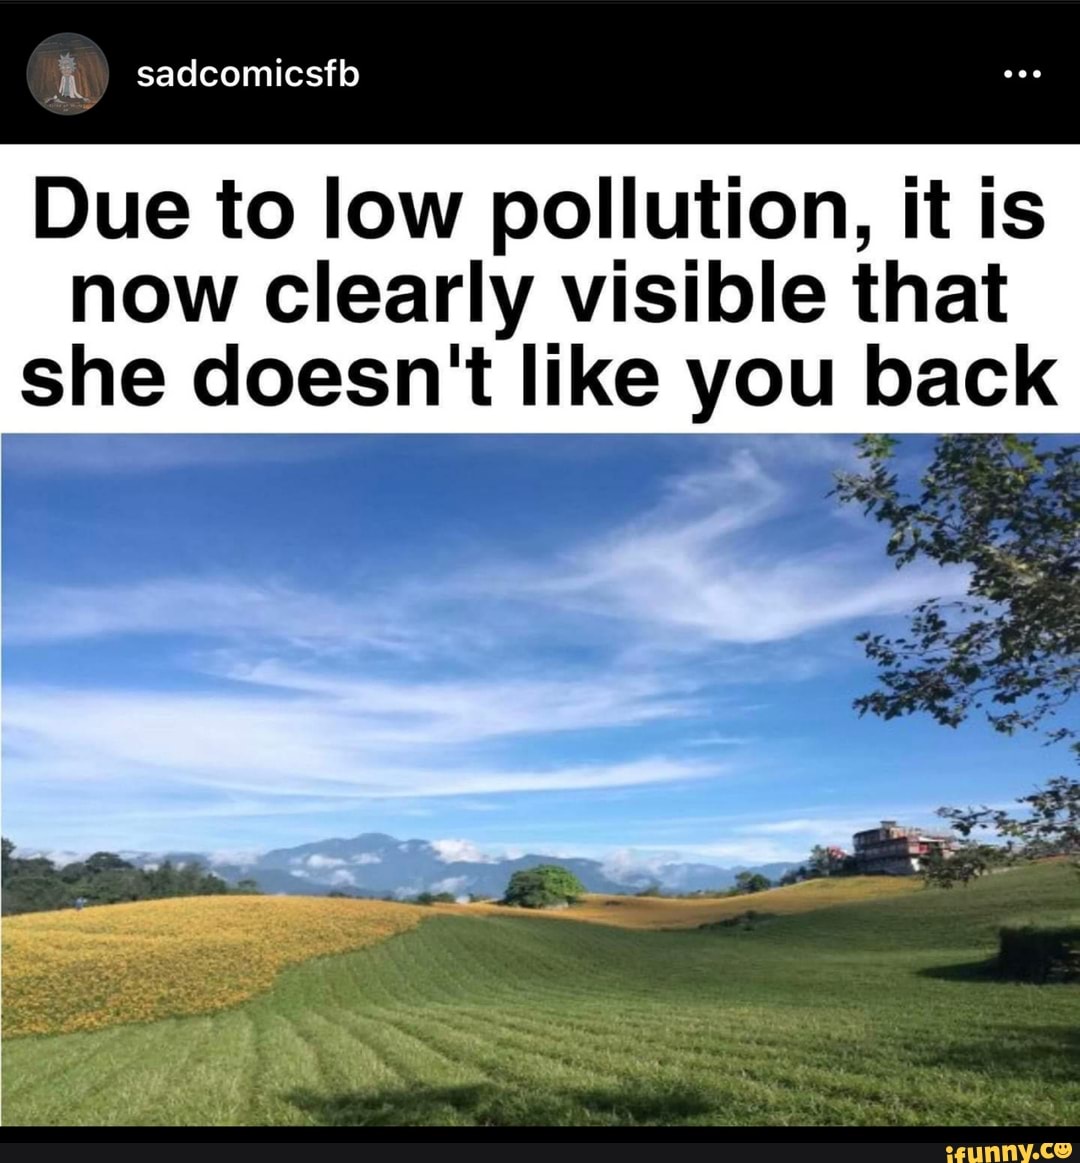 He added much to the pollution. Meme about pollution. Now low